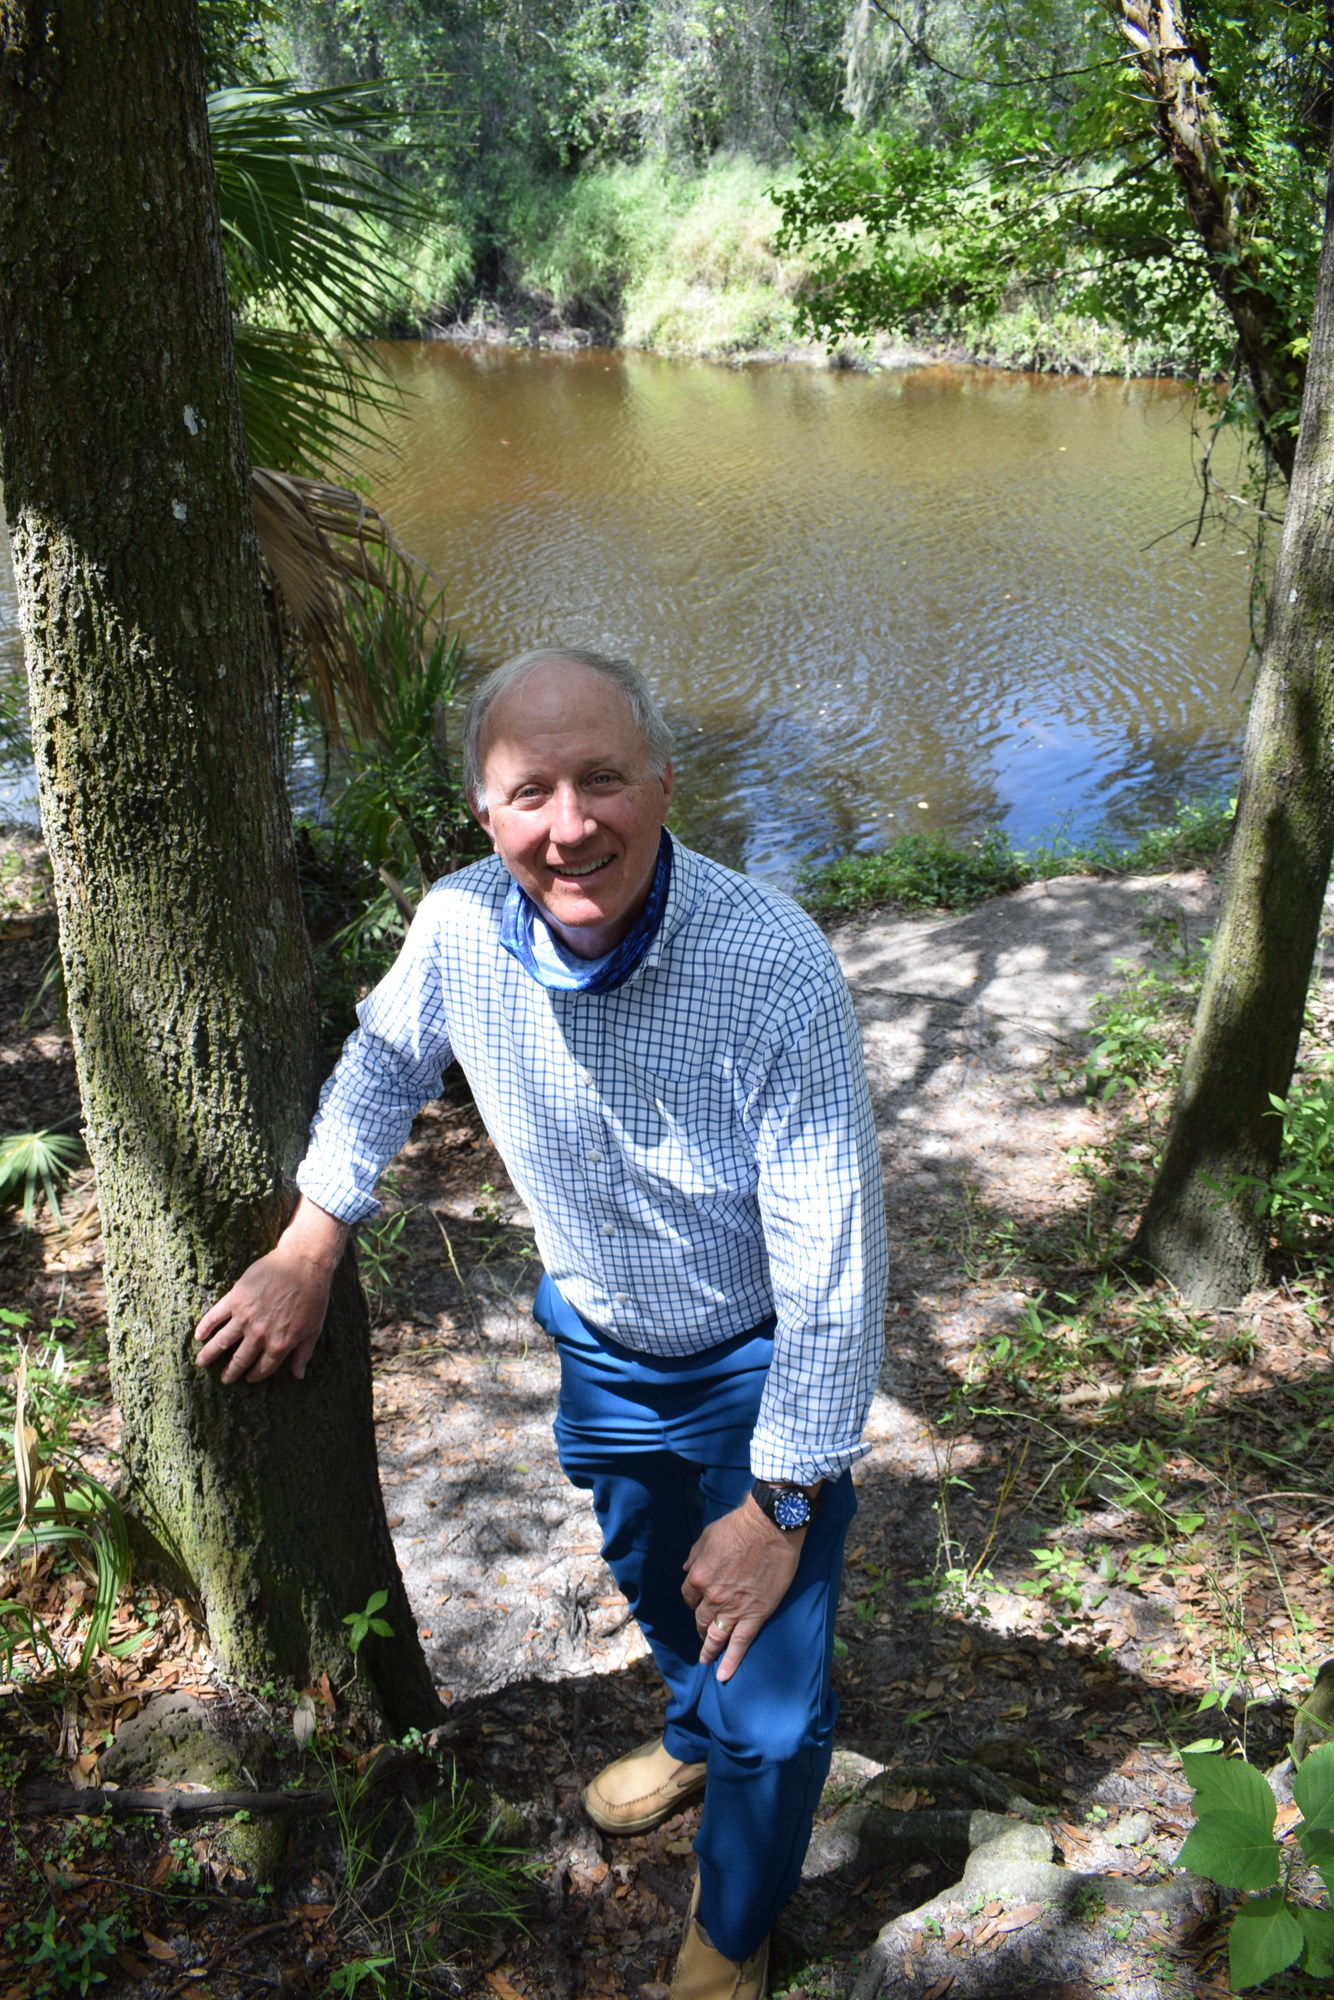 Unlike neighbors such as Sarasota County and Hillsborough County, Manatee County does not have a connected trail system. Parks and Natural Resources Director Charlie Hunsicker has been working to change that for 25 years. File.